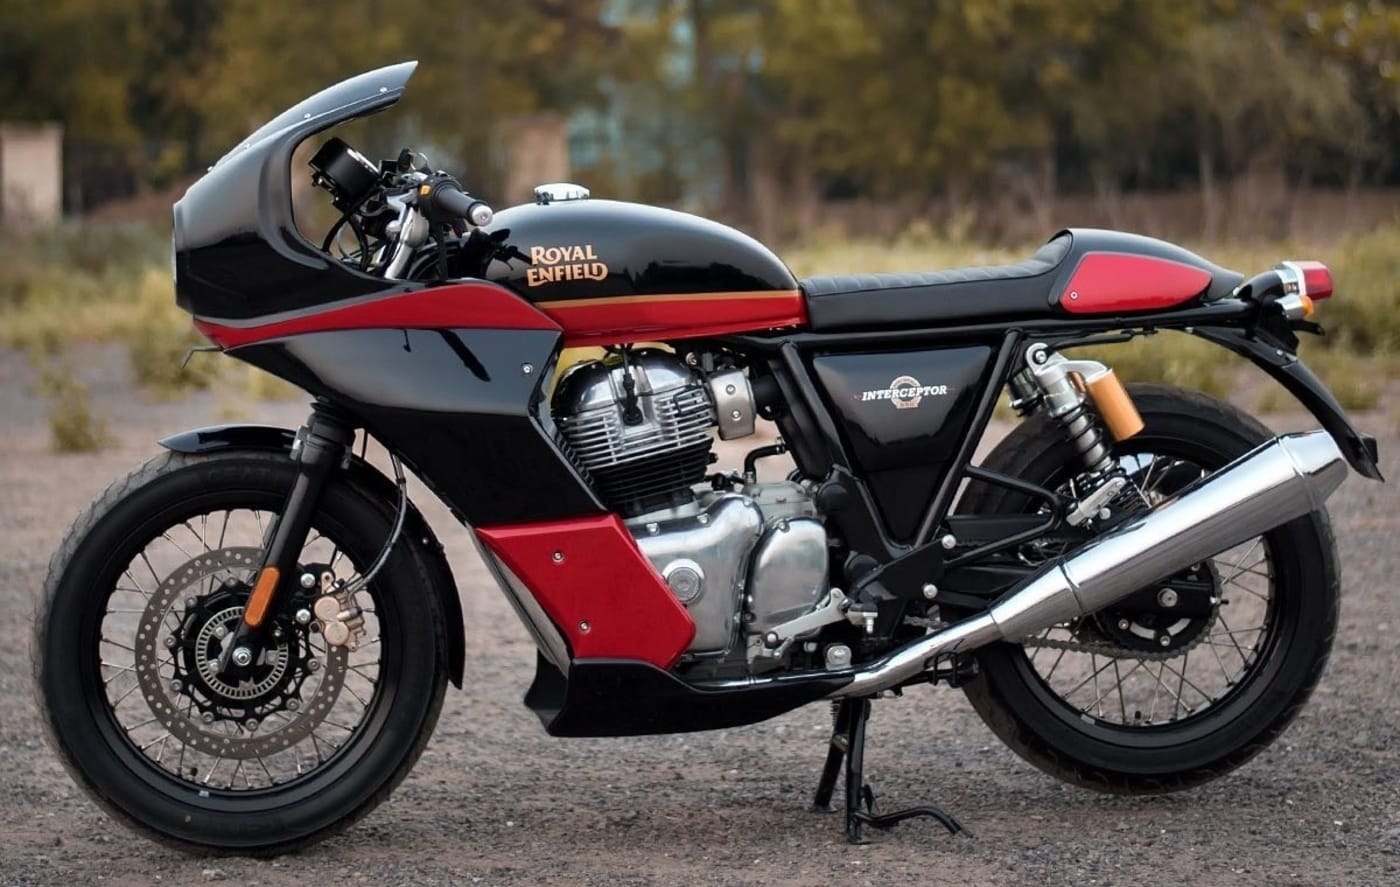 Royal Enfield Continental GT650 Looks Pretty With A Custom Front Fairing